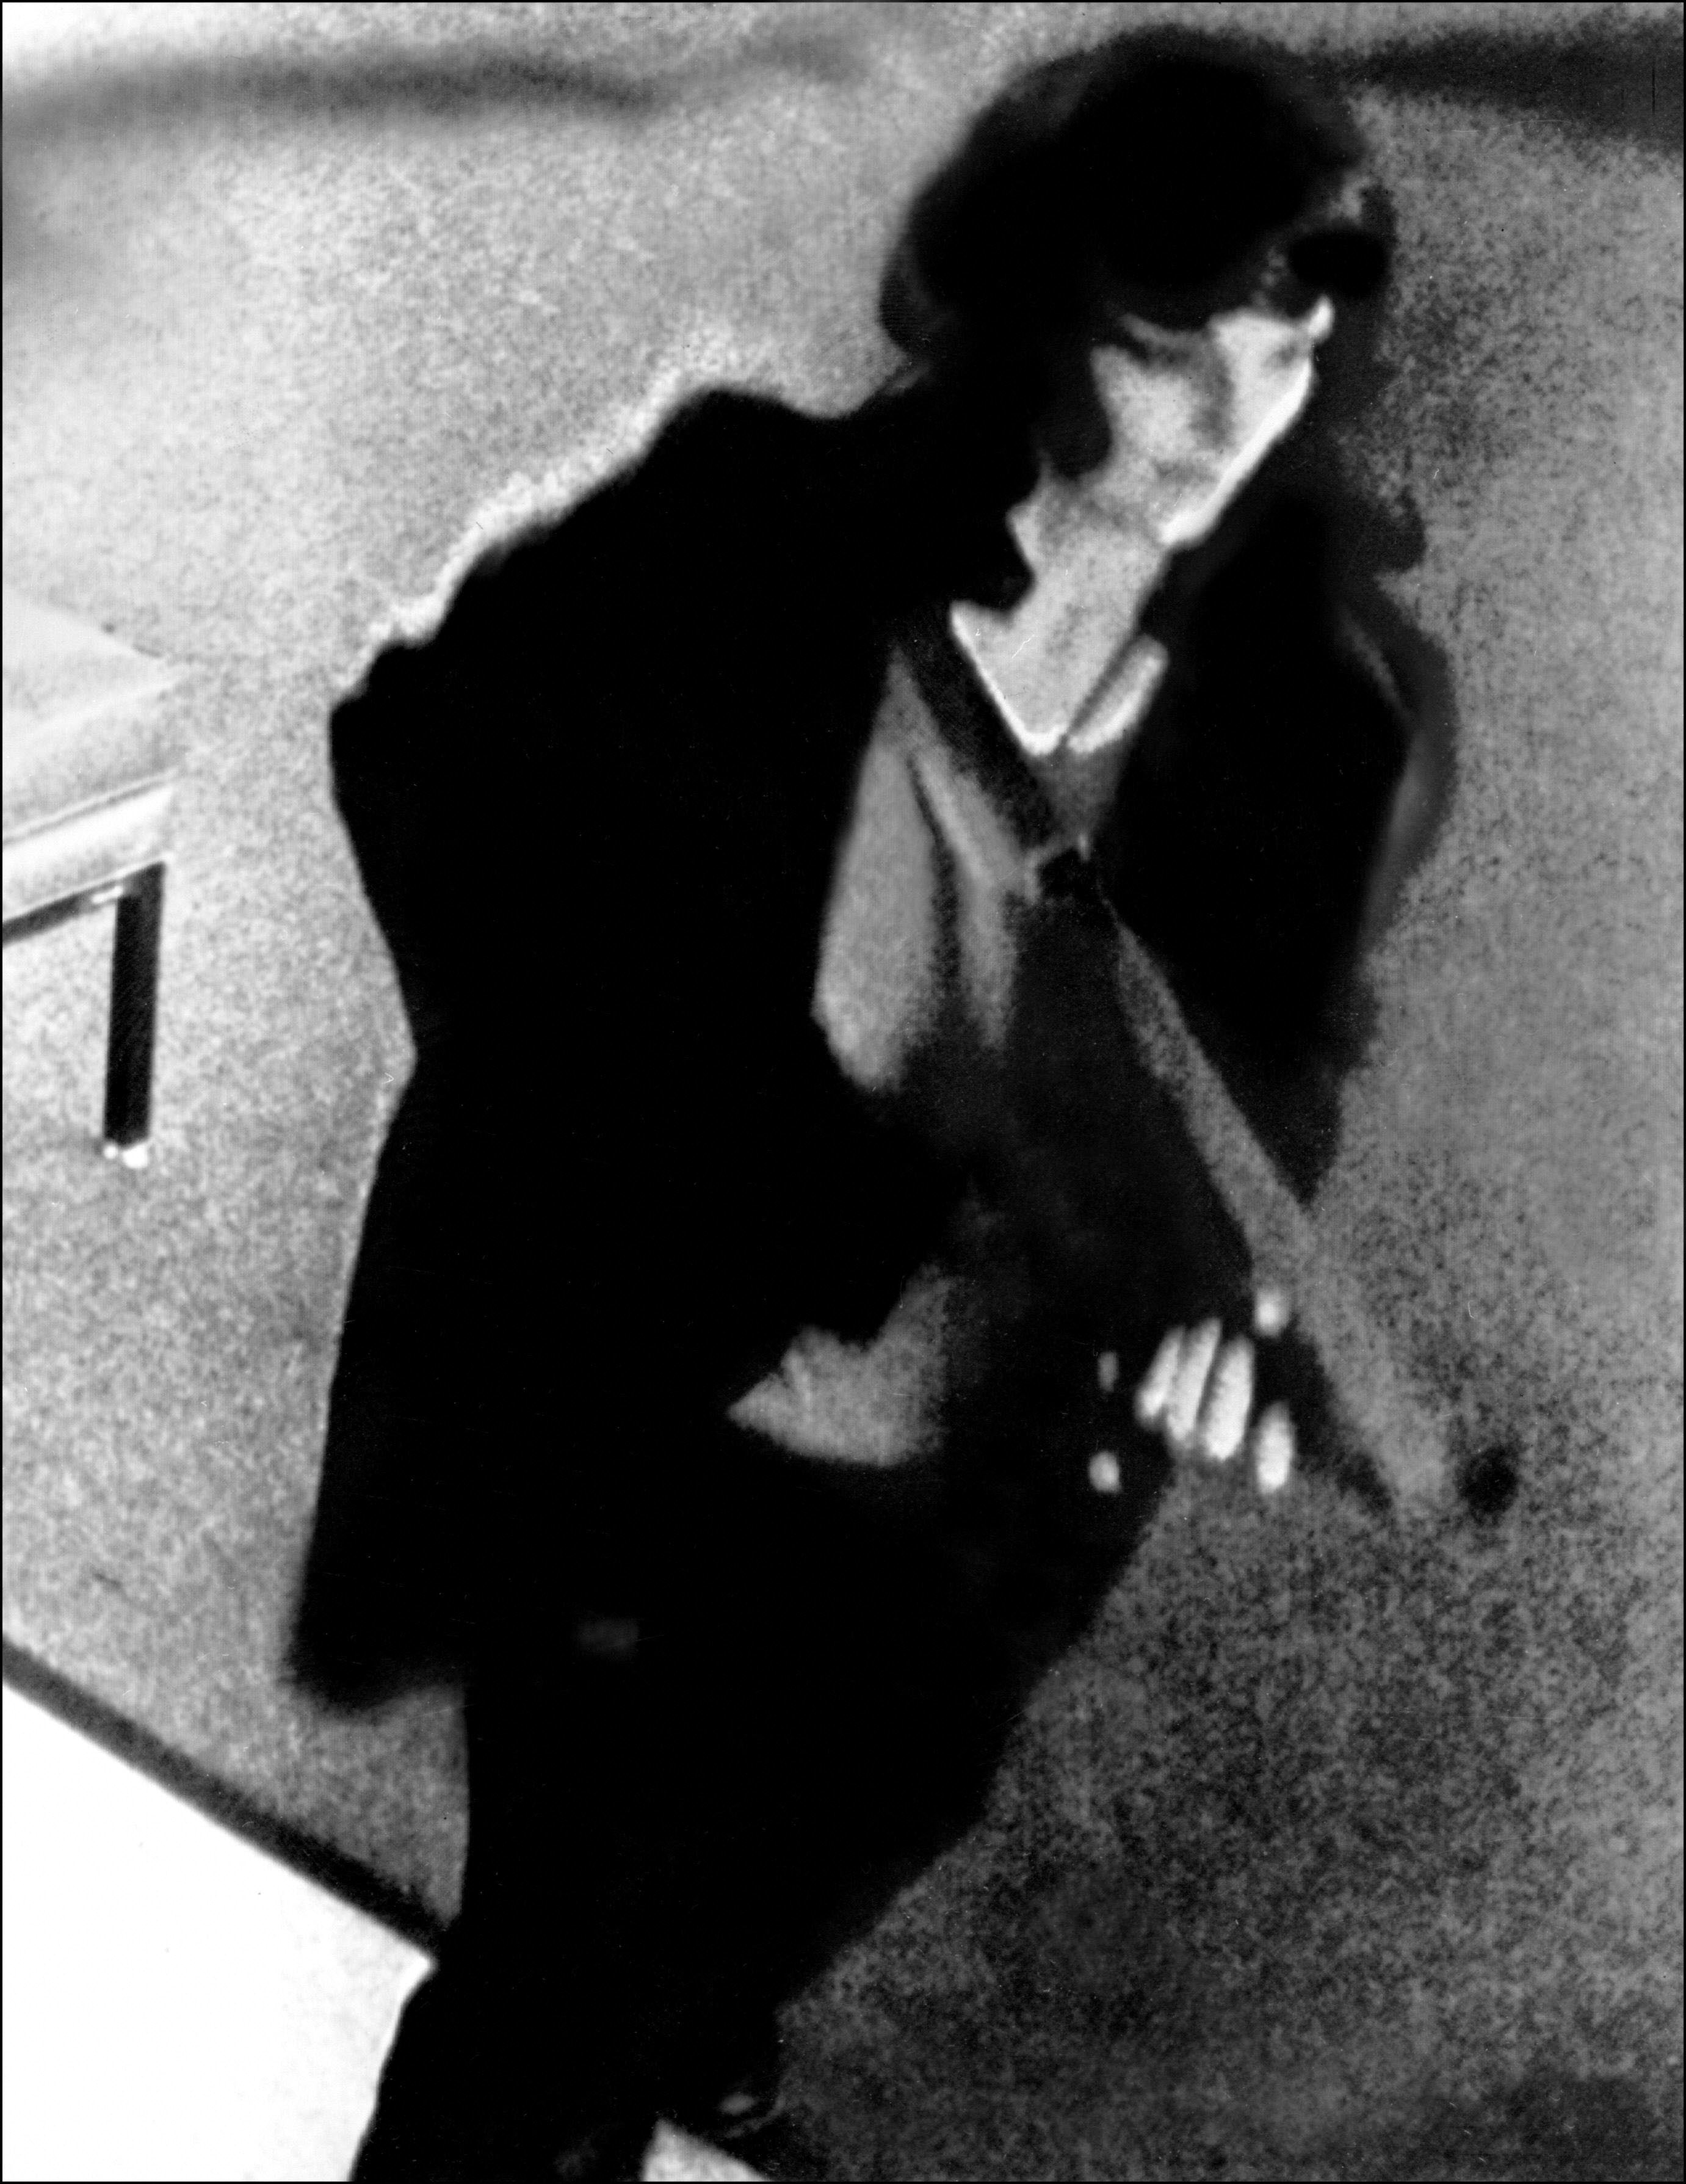 Image of Patty Hearst in a wig